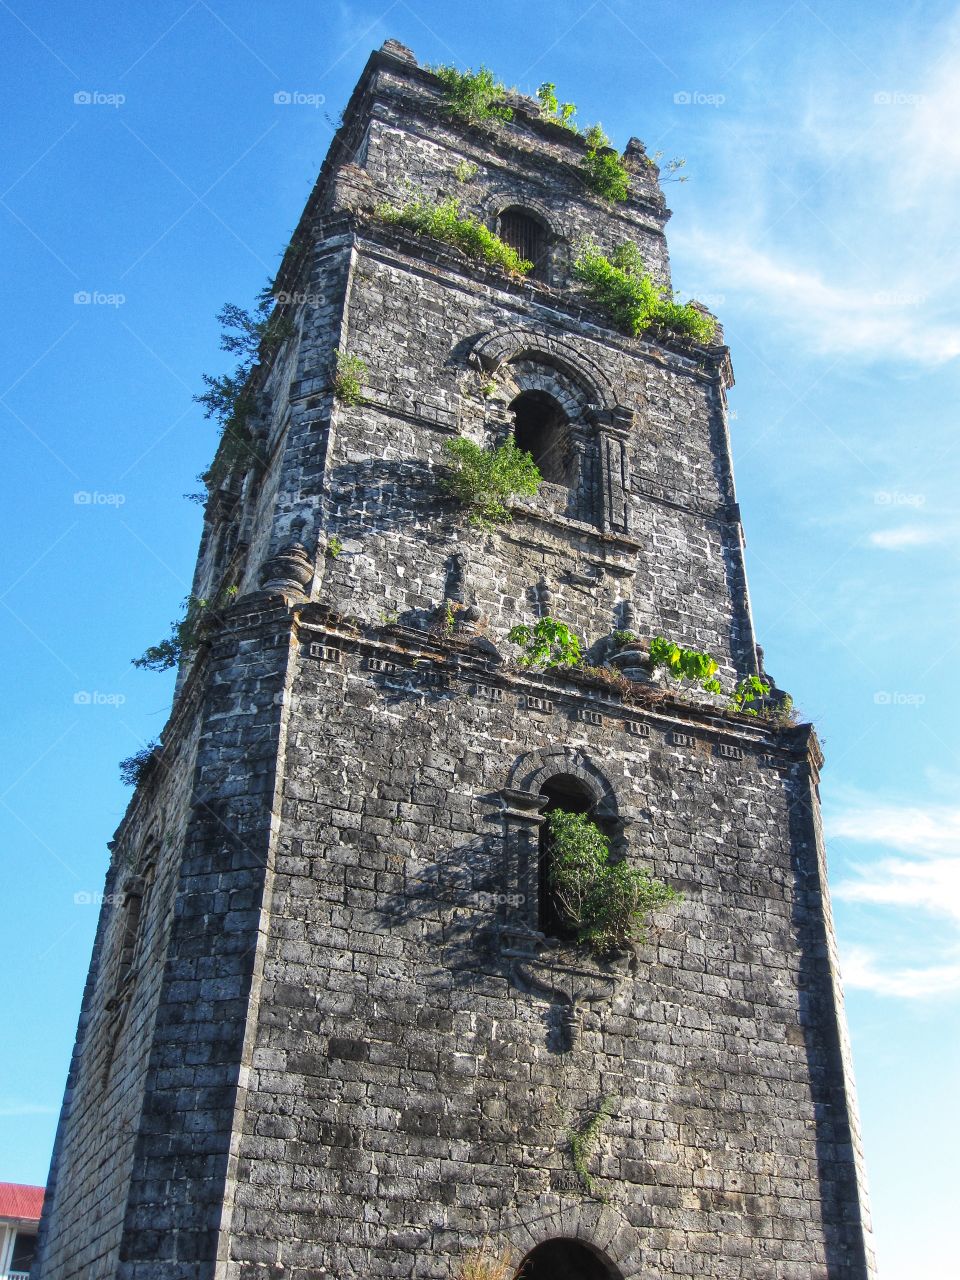 Old constantly sinking bell tower because of poor soil foundation and earthquakes, it can be found in Laoag City, Ilocos Norte, Philippines.